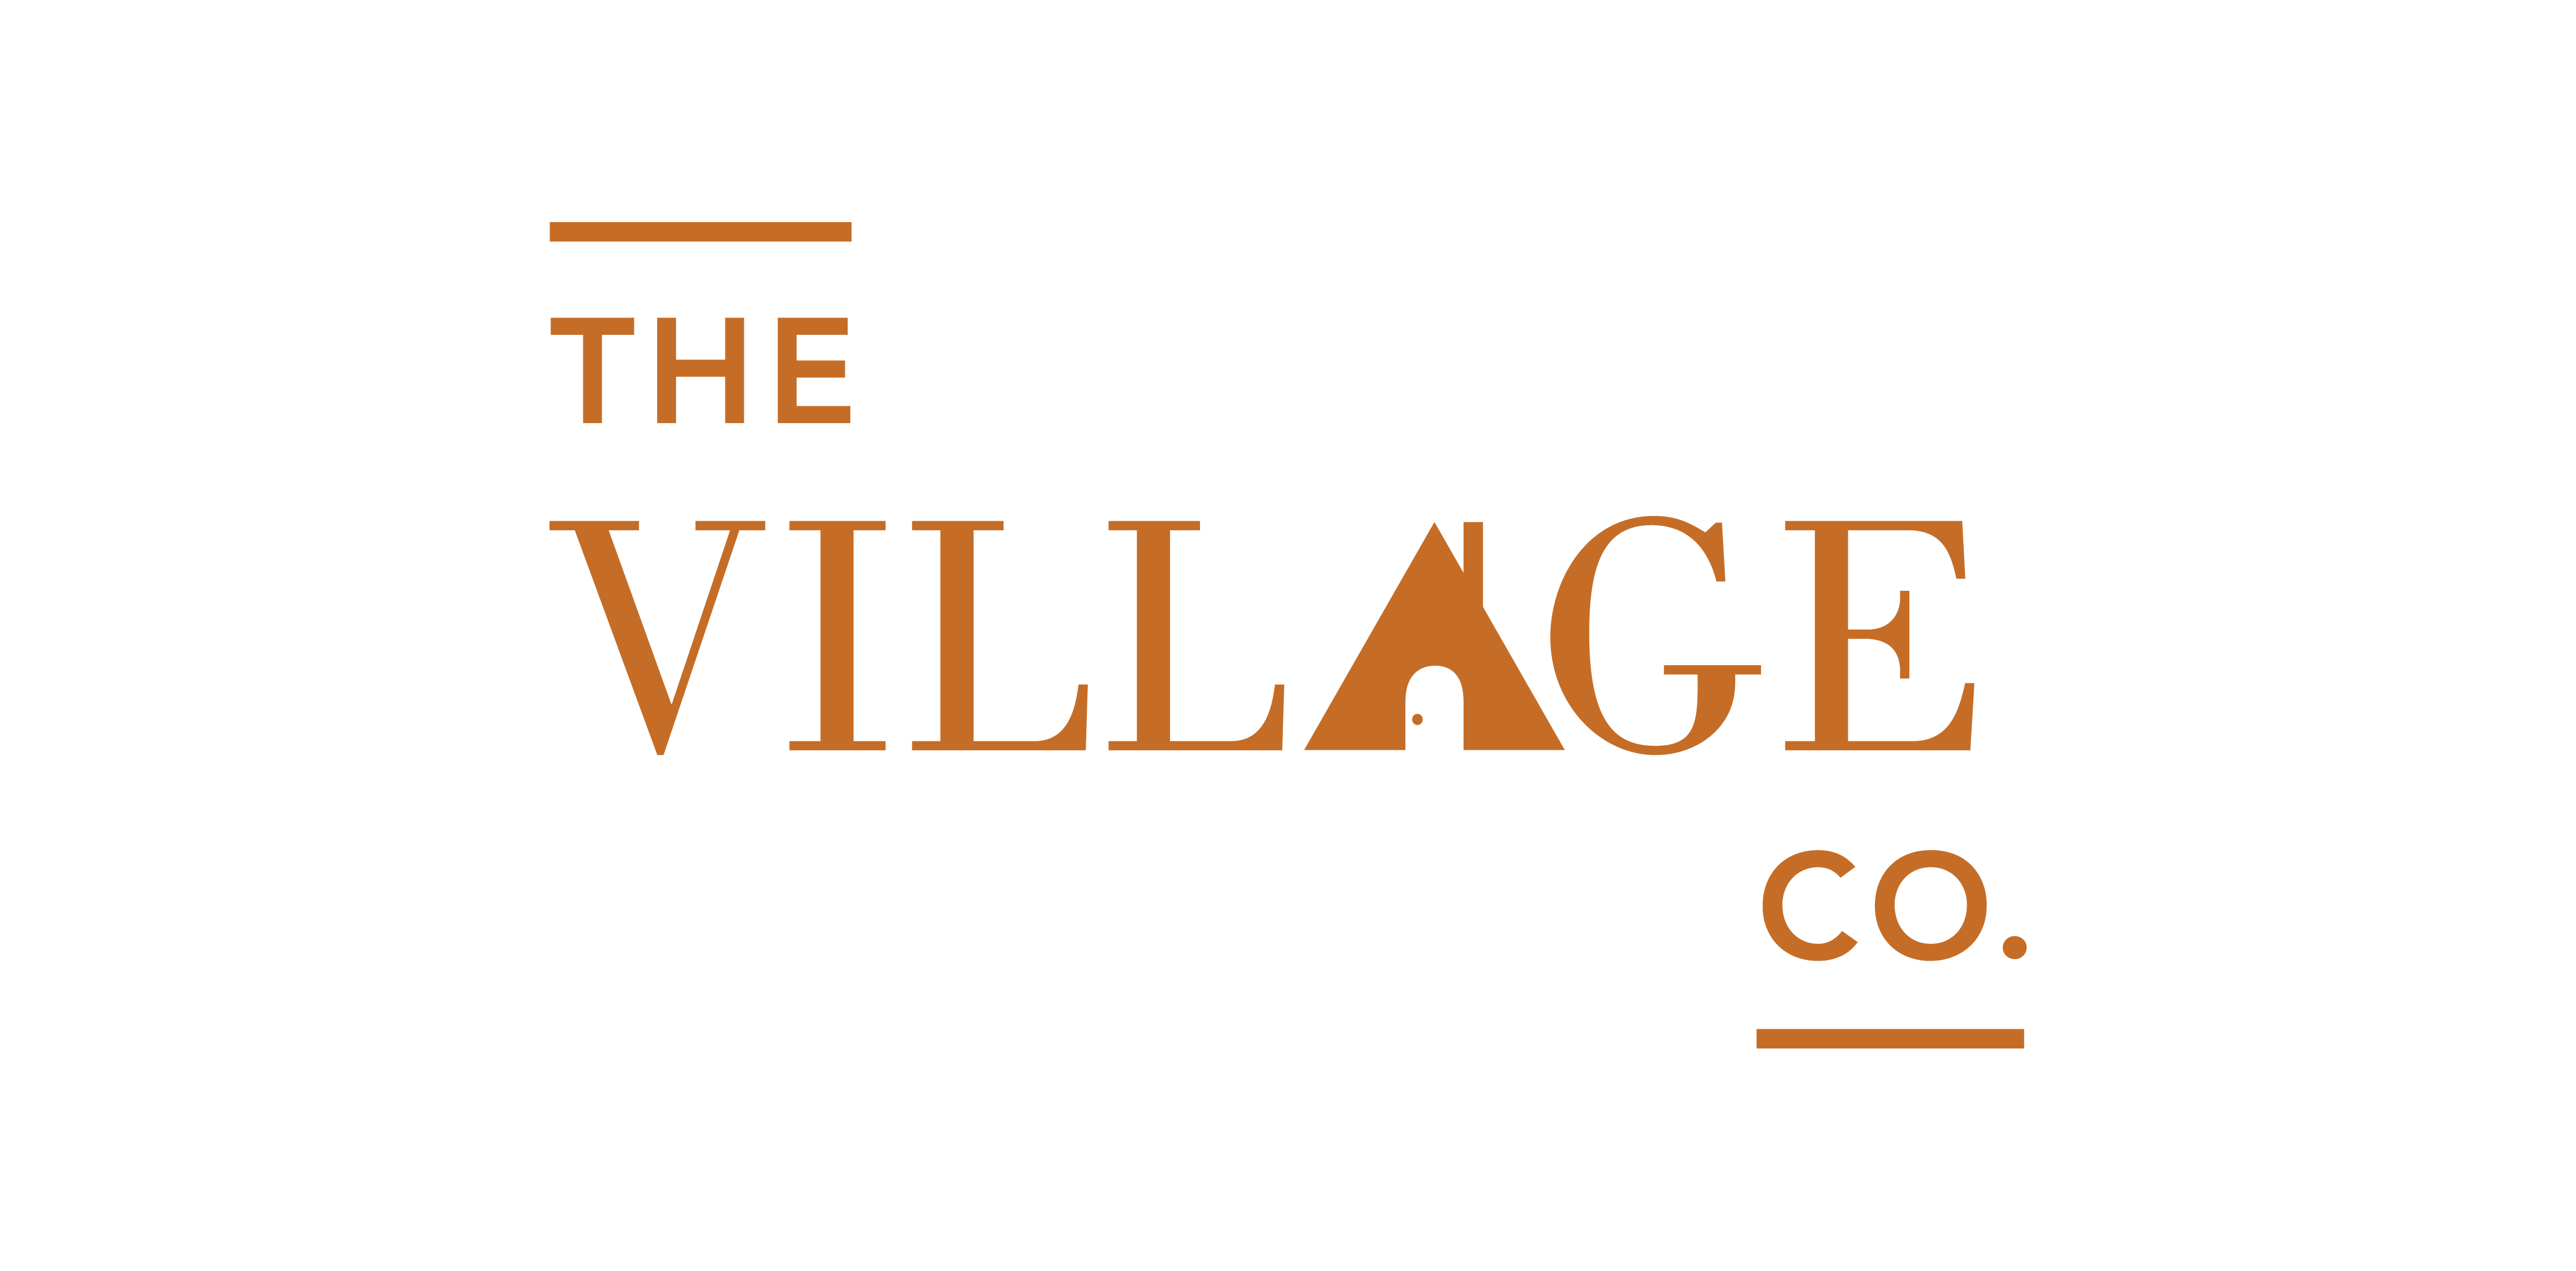 GET INVOLVED - The Village Co